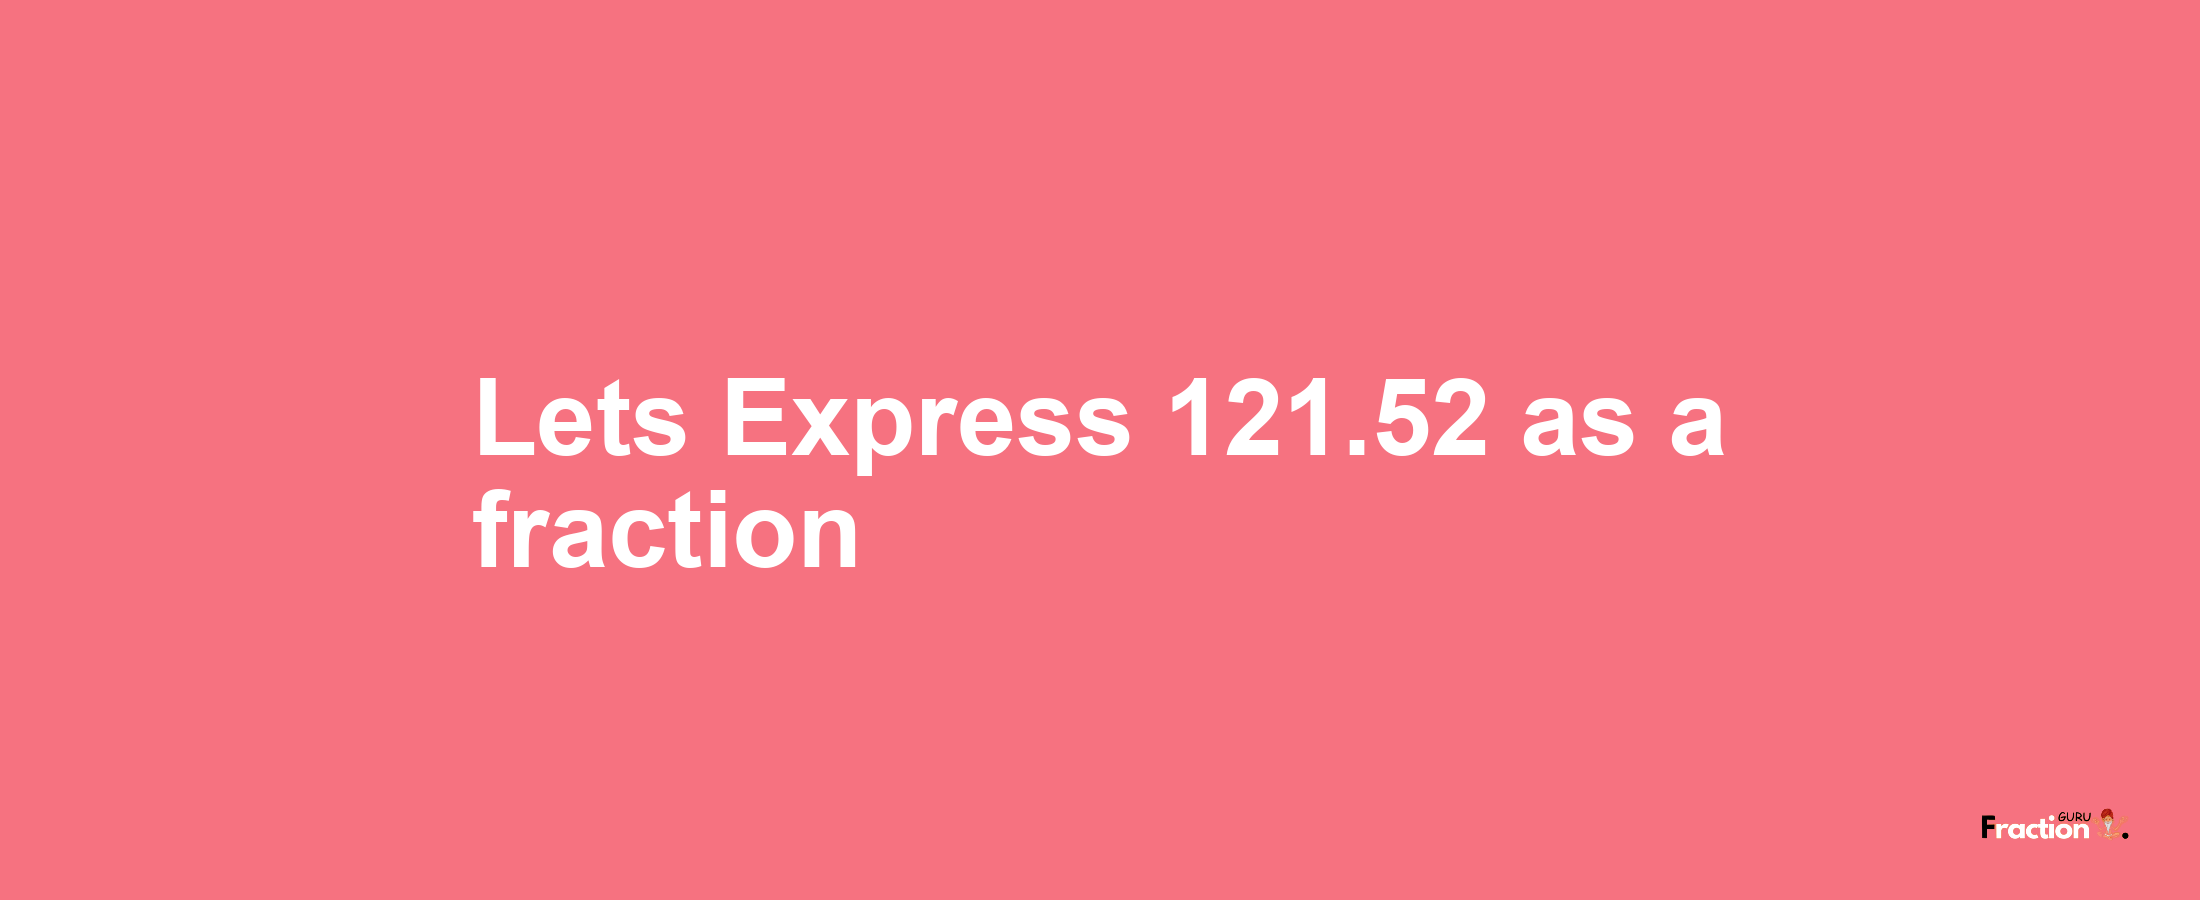 Lets Express 121.52 as afraction